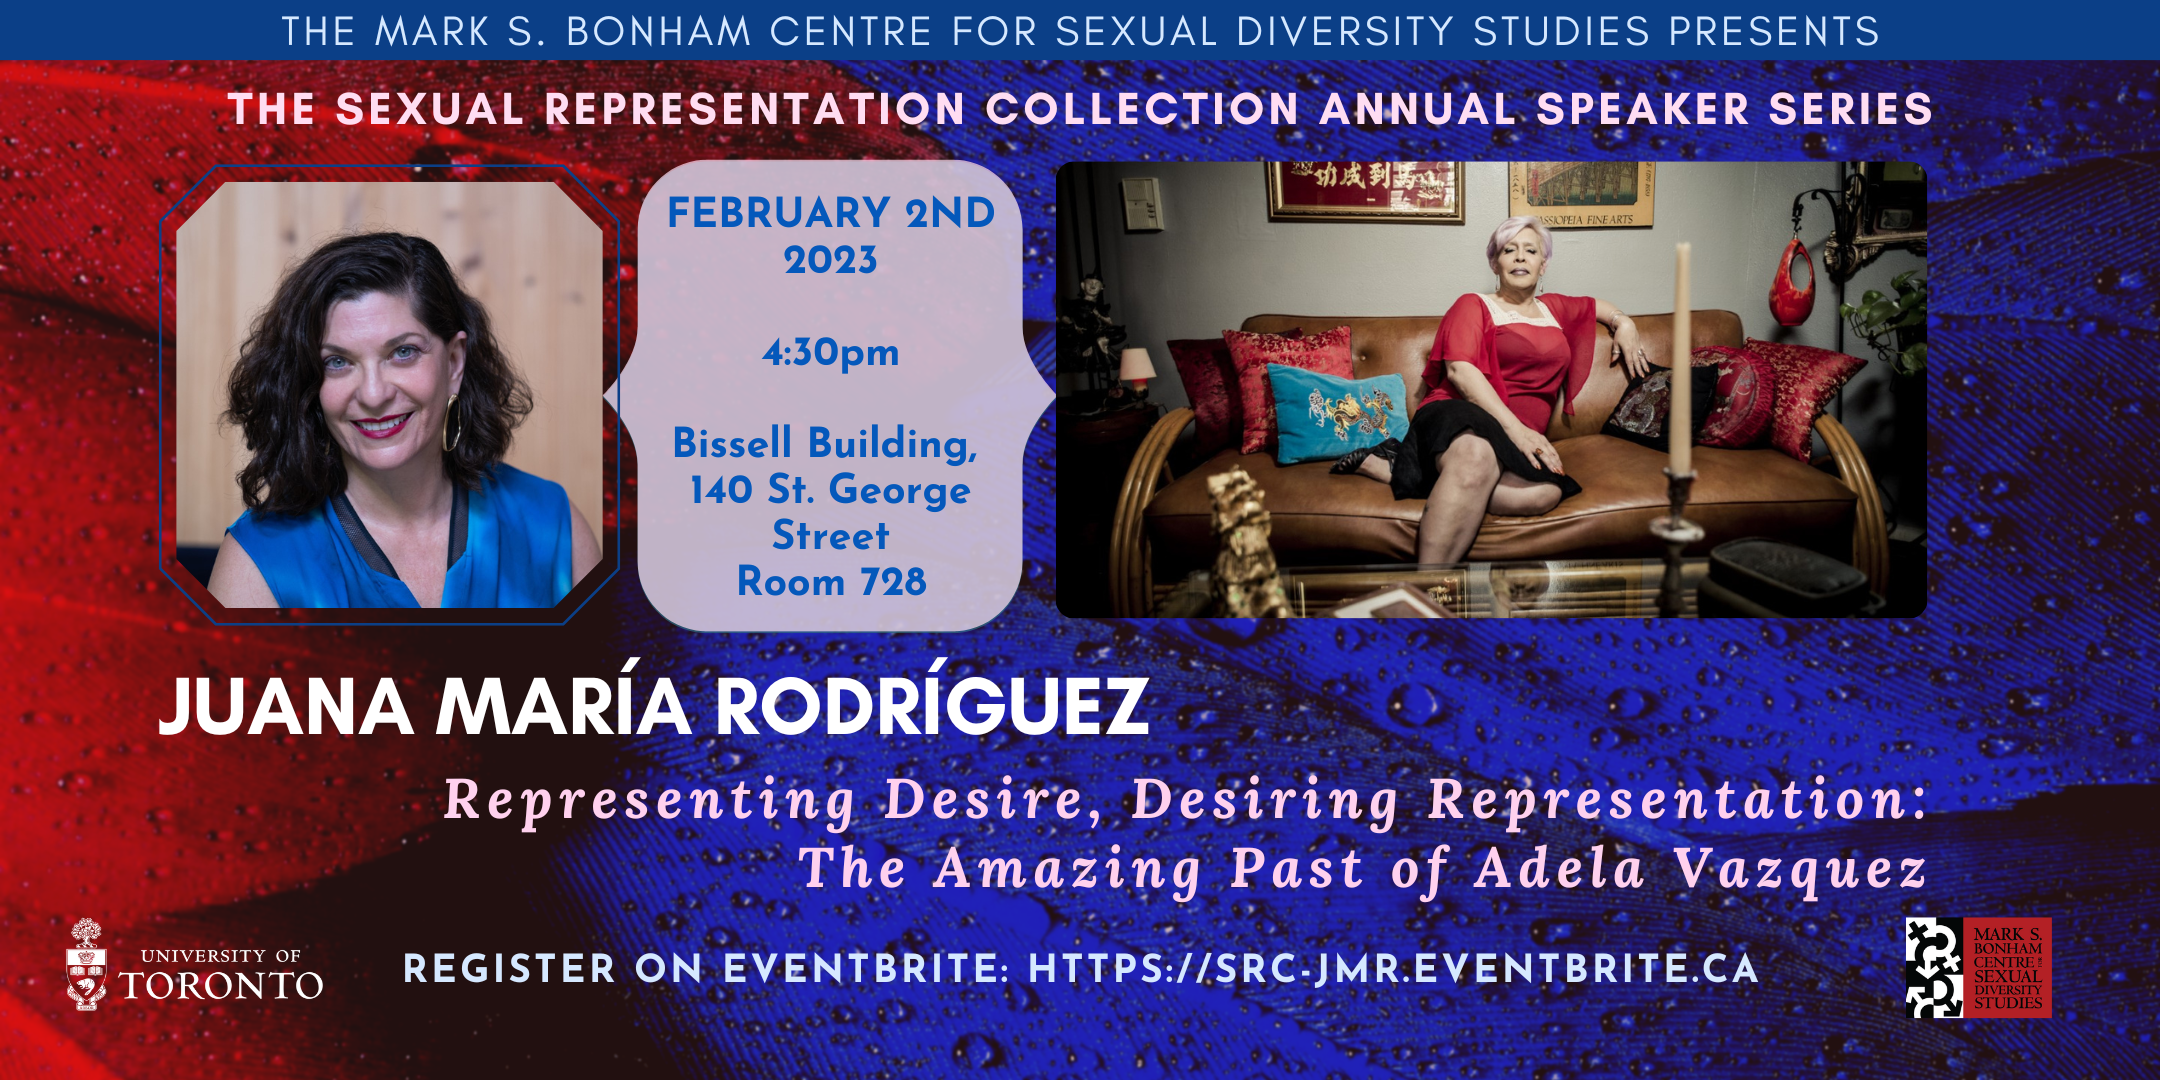 The Sexual Representation Collection Lecture Series Presents: Juana María Rodríguez: The Amazing Past of Adela Vazquez